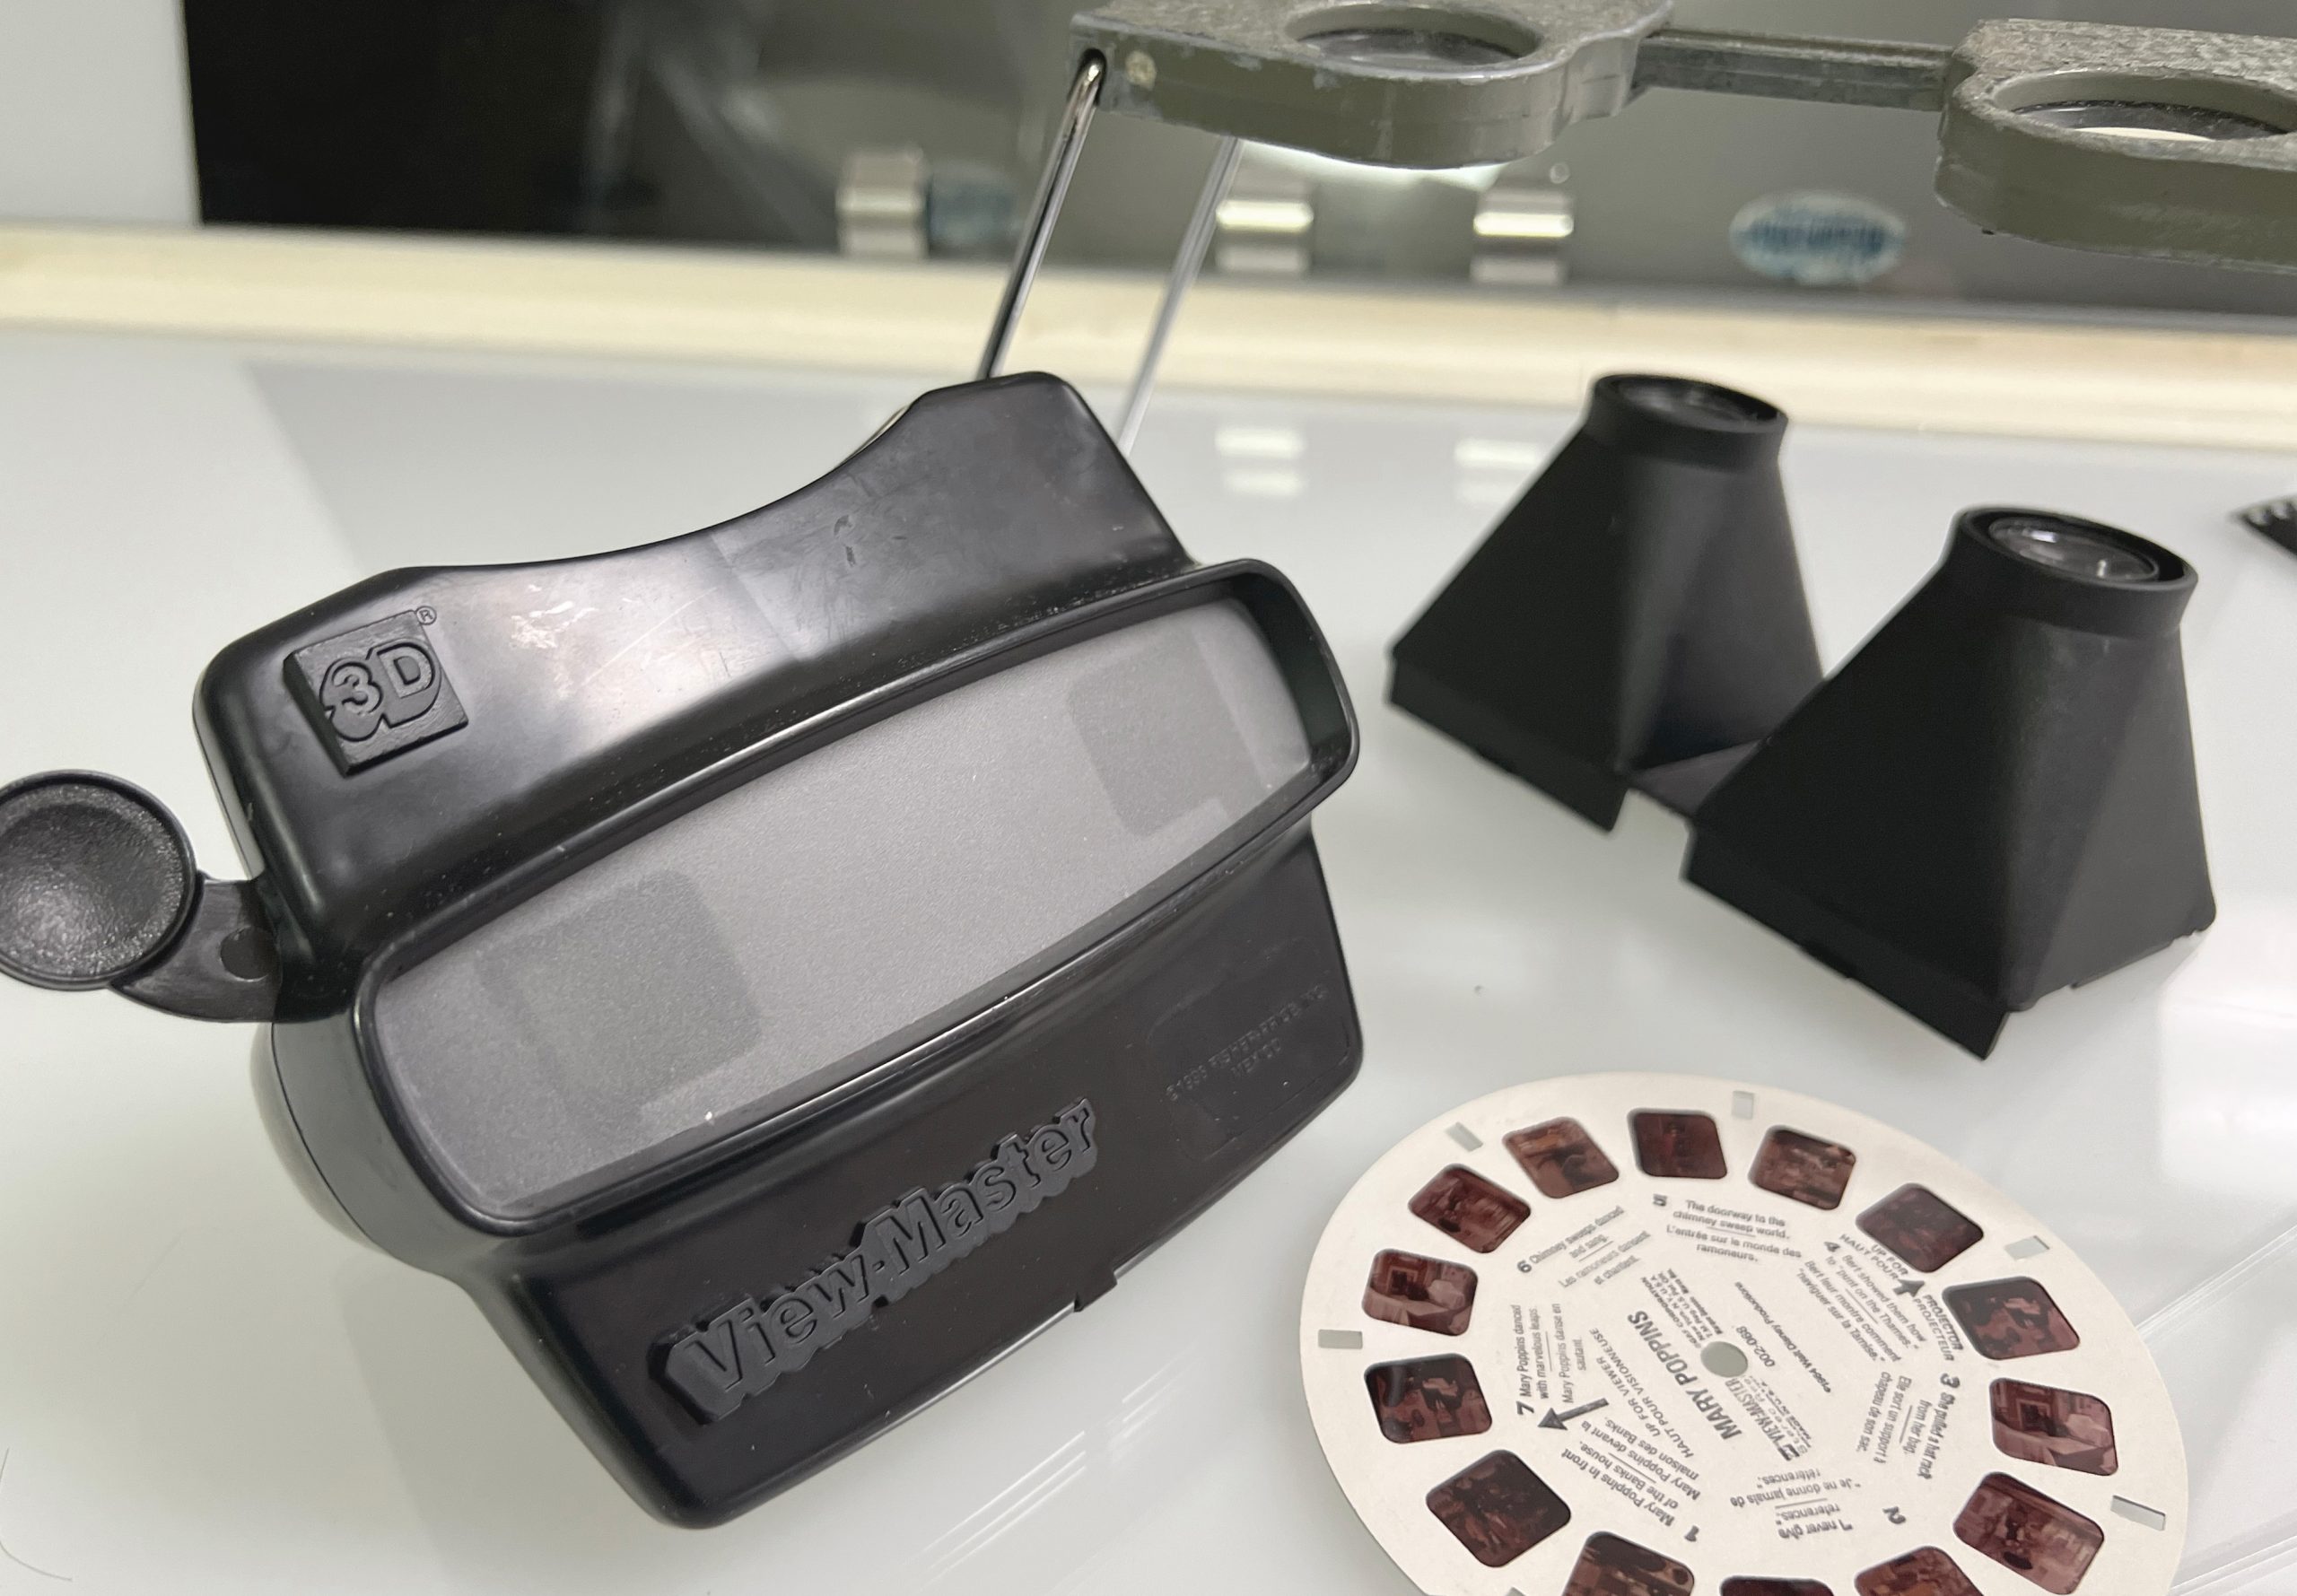 View-Master viewer with commercial slide disc and stereoscopic viewers for unprocessed film. 